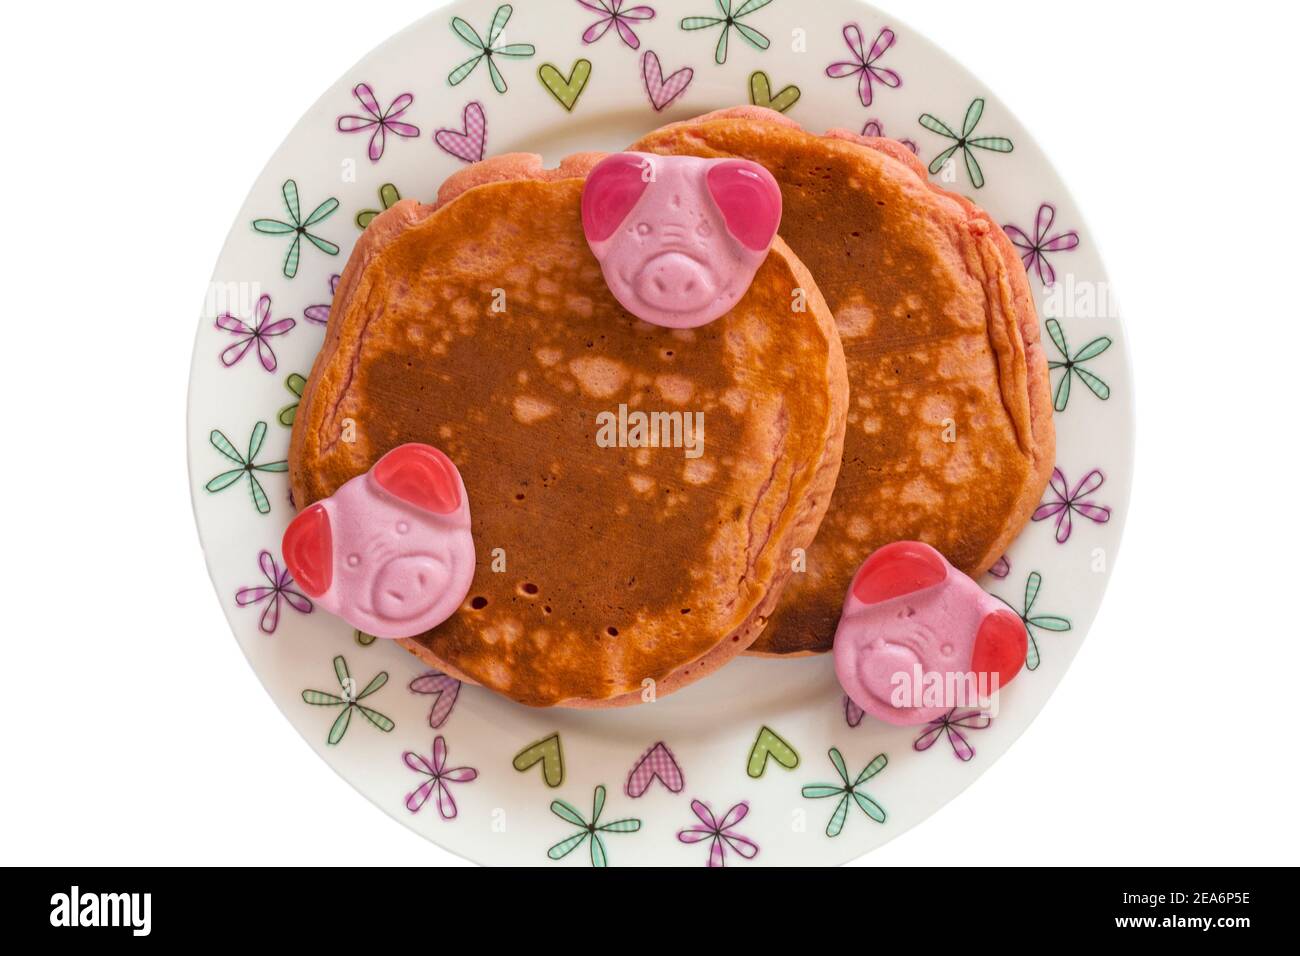 Percy Pig pancakes from M&S on plate with Percy Pig sweets ready for St Valentines day set on white background Stock Photo